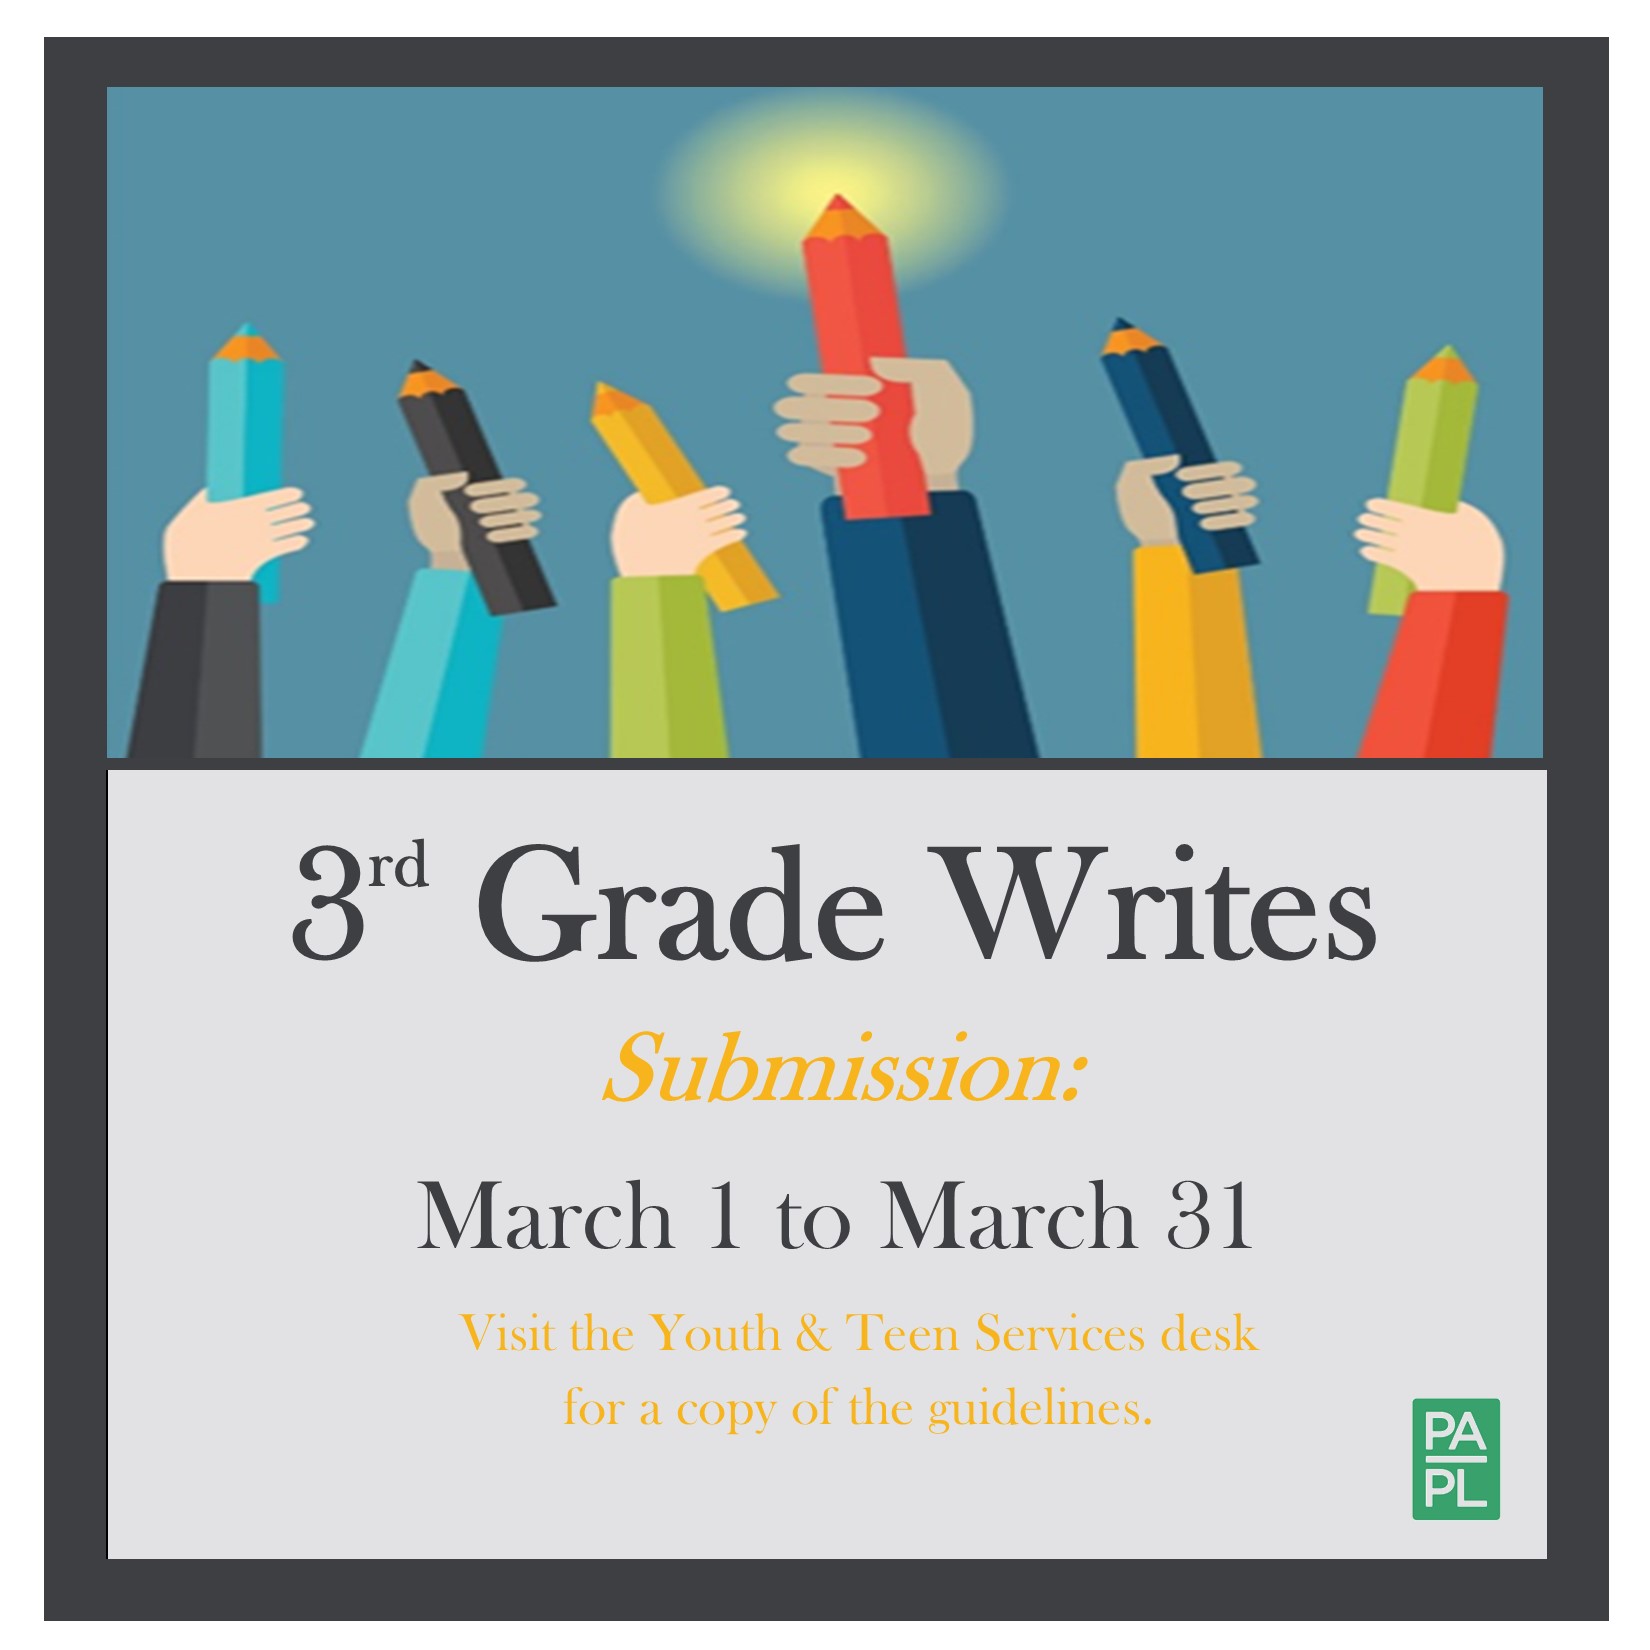 3rd Grade Writes submissions March 1 to March 31